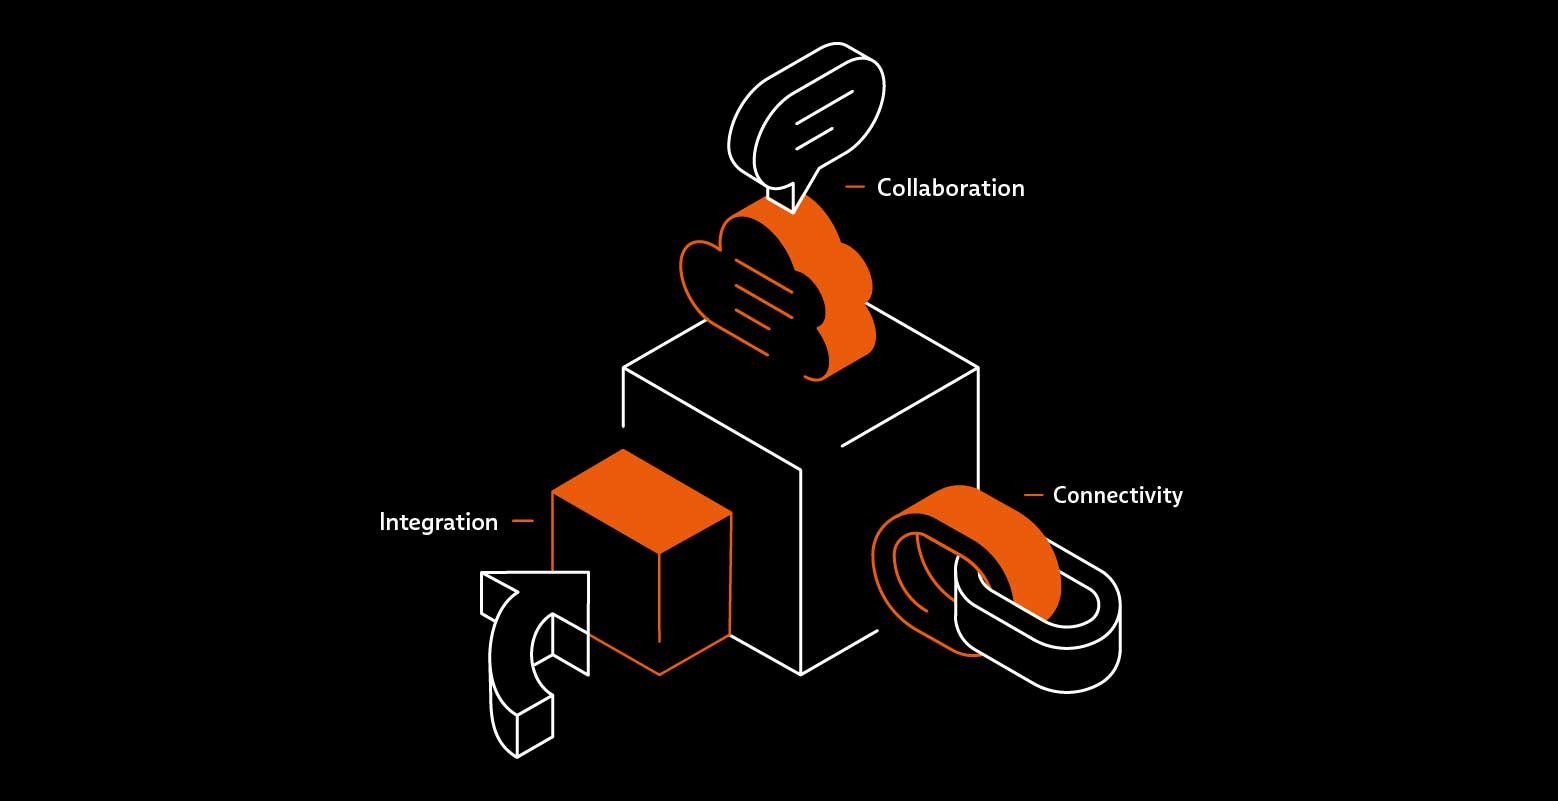 Black background, icon cube with 3 elements collaboration, integration and connectivity